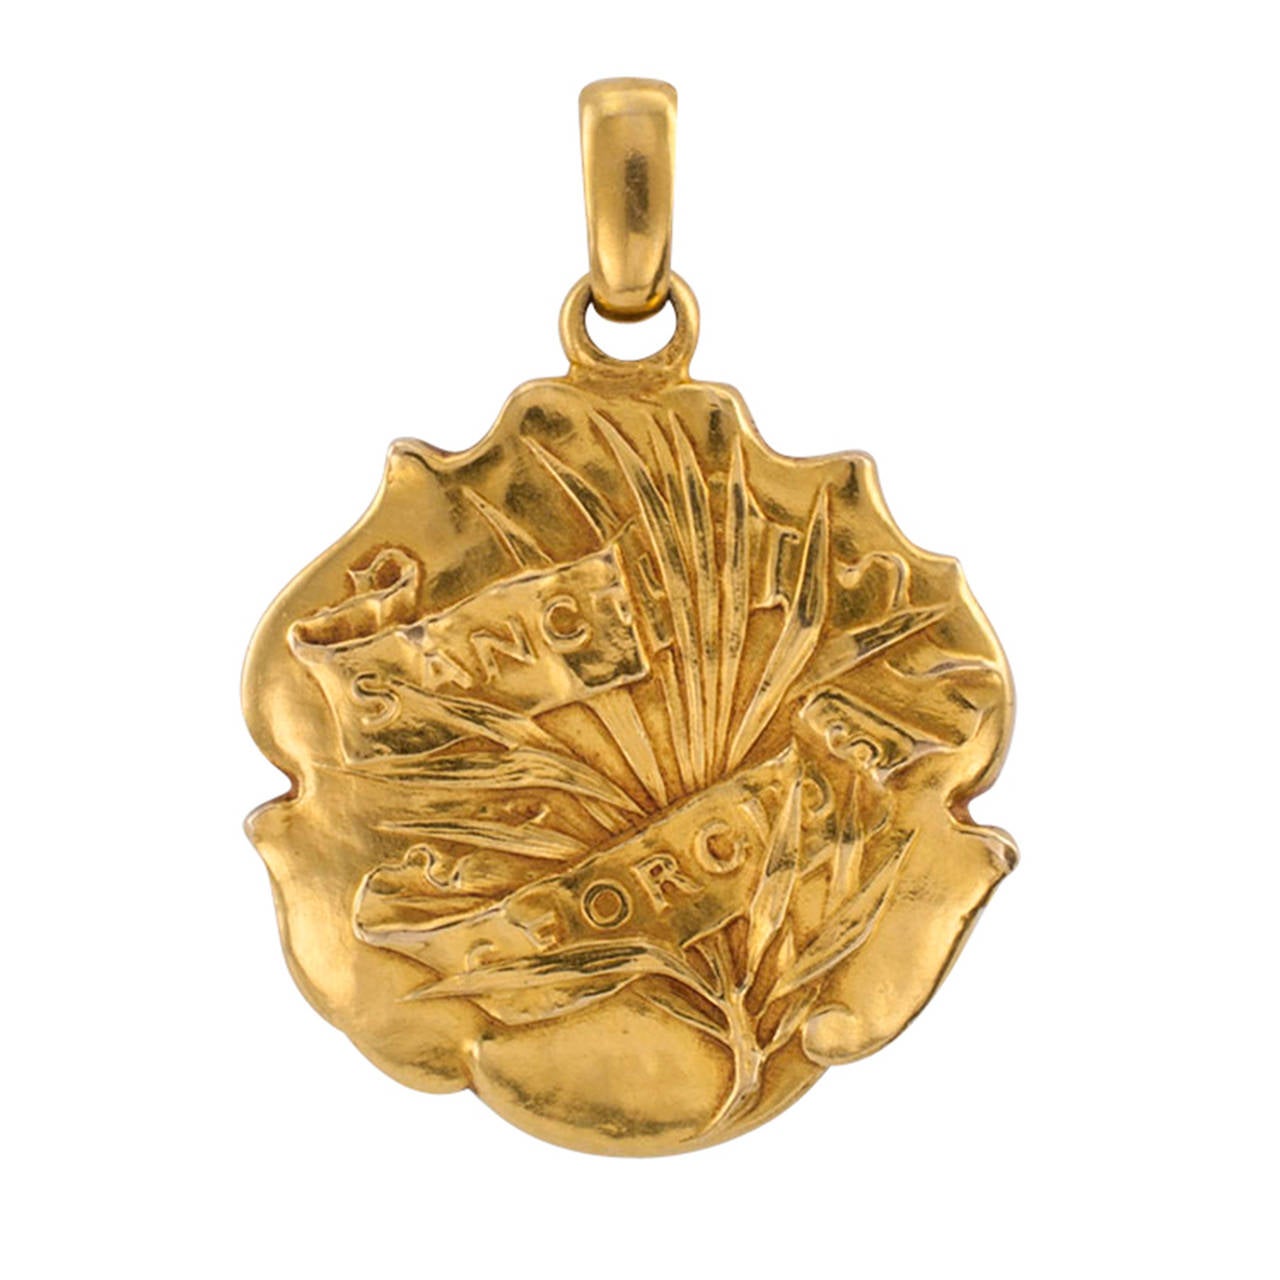 French Art Nouveau 18 Karat Gold Saint George Pendant

This is one of the most beautiful pendants depicting the popular legend of Saint George slaying the dragon ever acquired for our estate jewelry collection.  Time, in a manner that only time